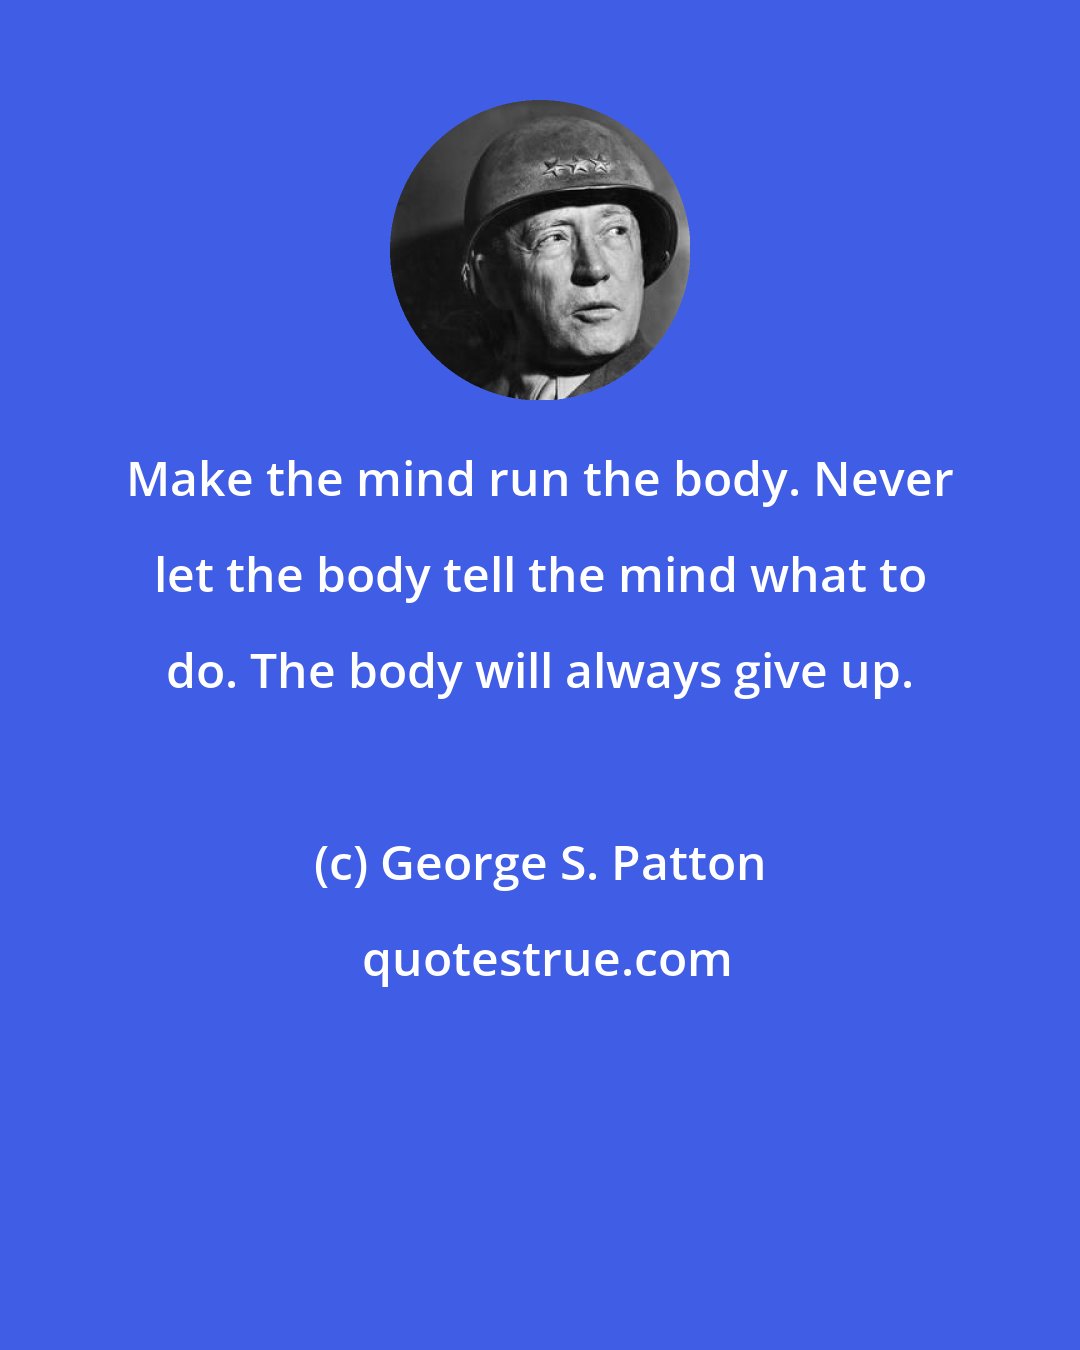 George S. Patton: Make the mind run the body. Never let the body tell the mind what to do. The body will always give up.